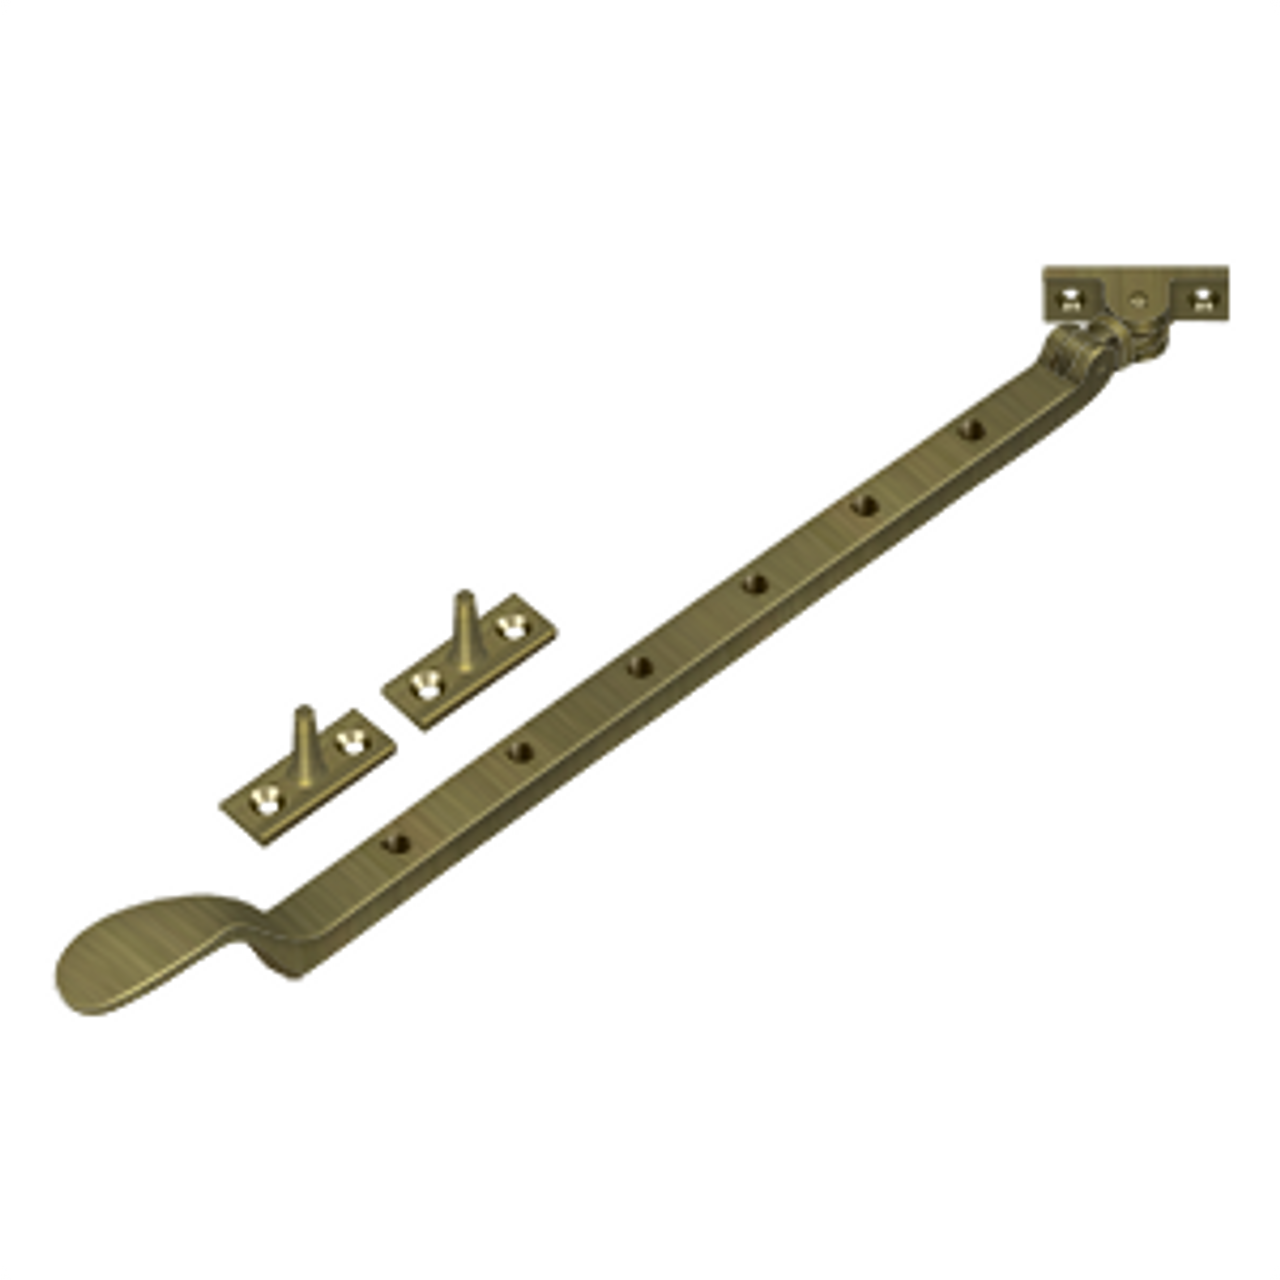 Deltana CSA13 13" COLONIALCASEMENT STAY ADJUSTER SOLID BRASS